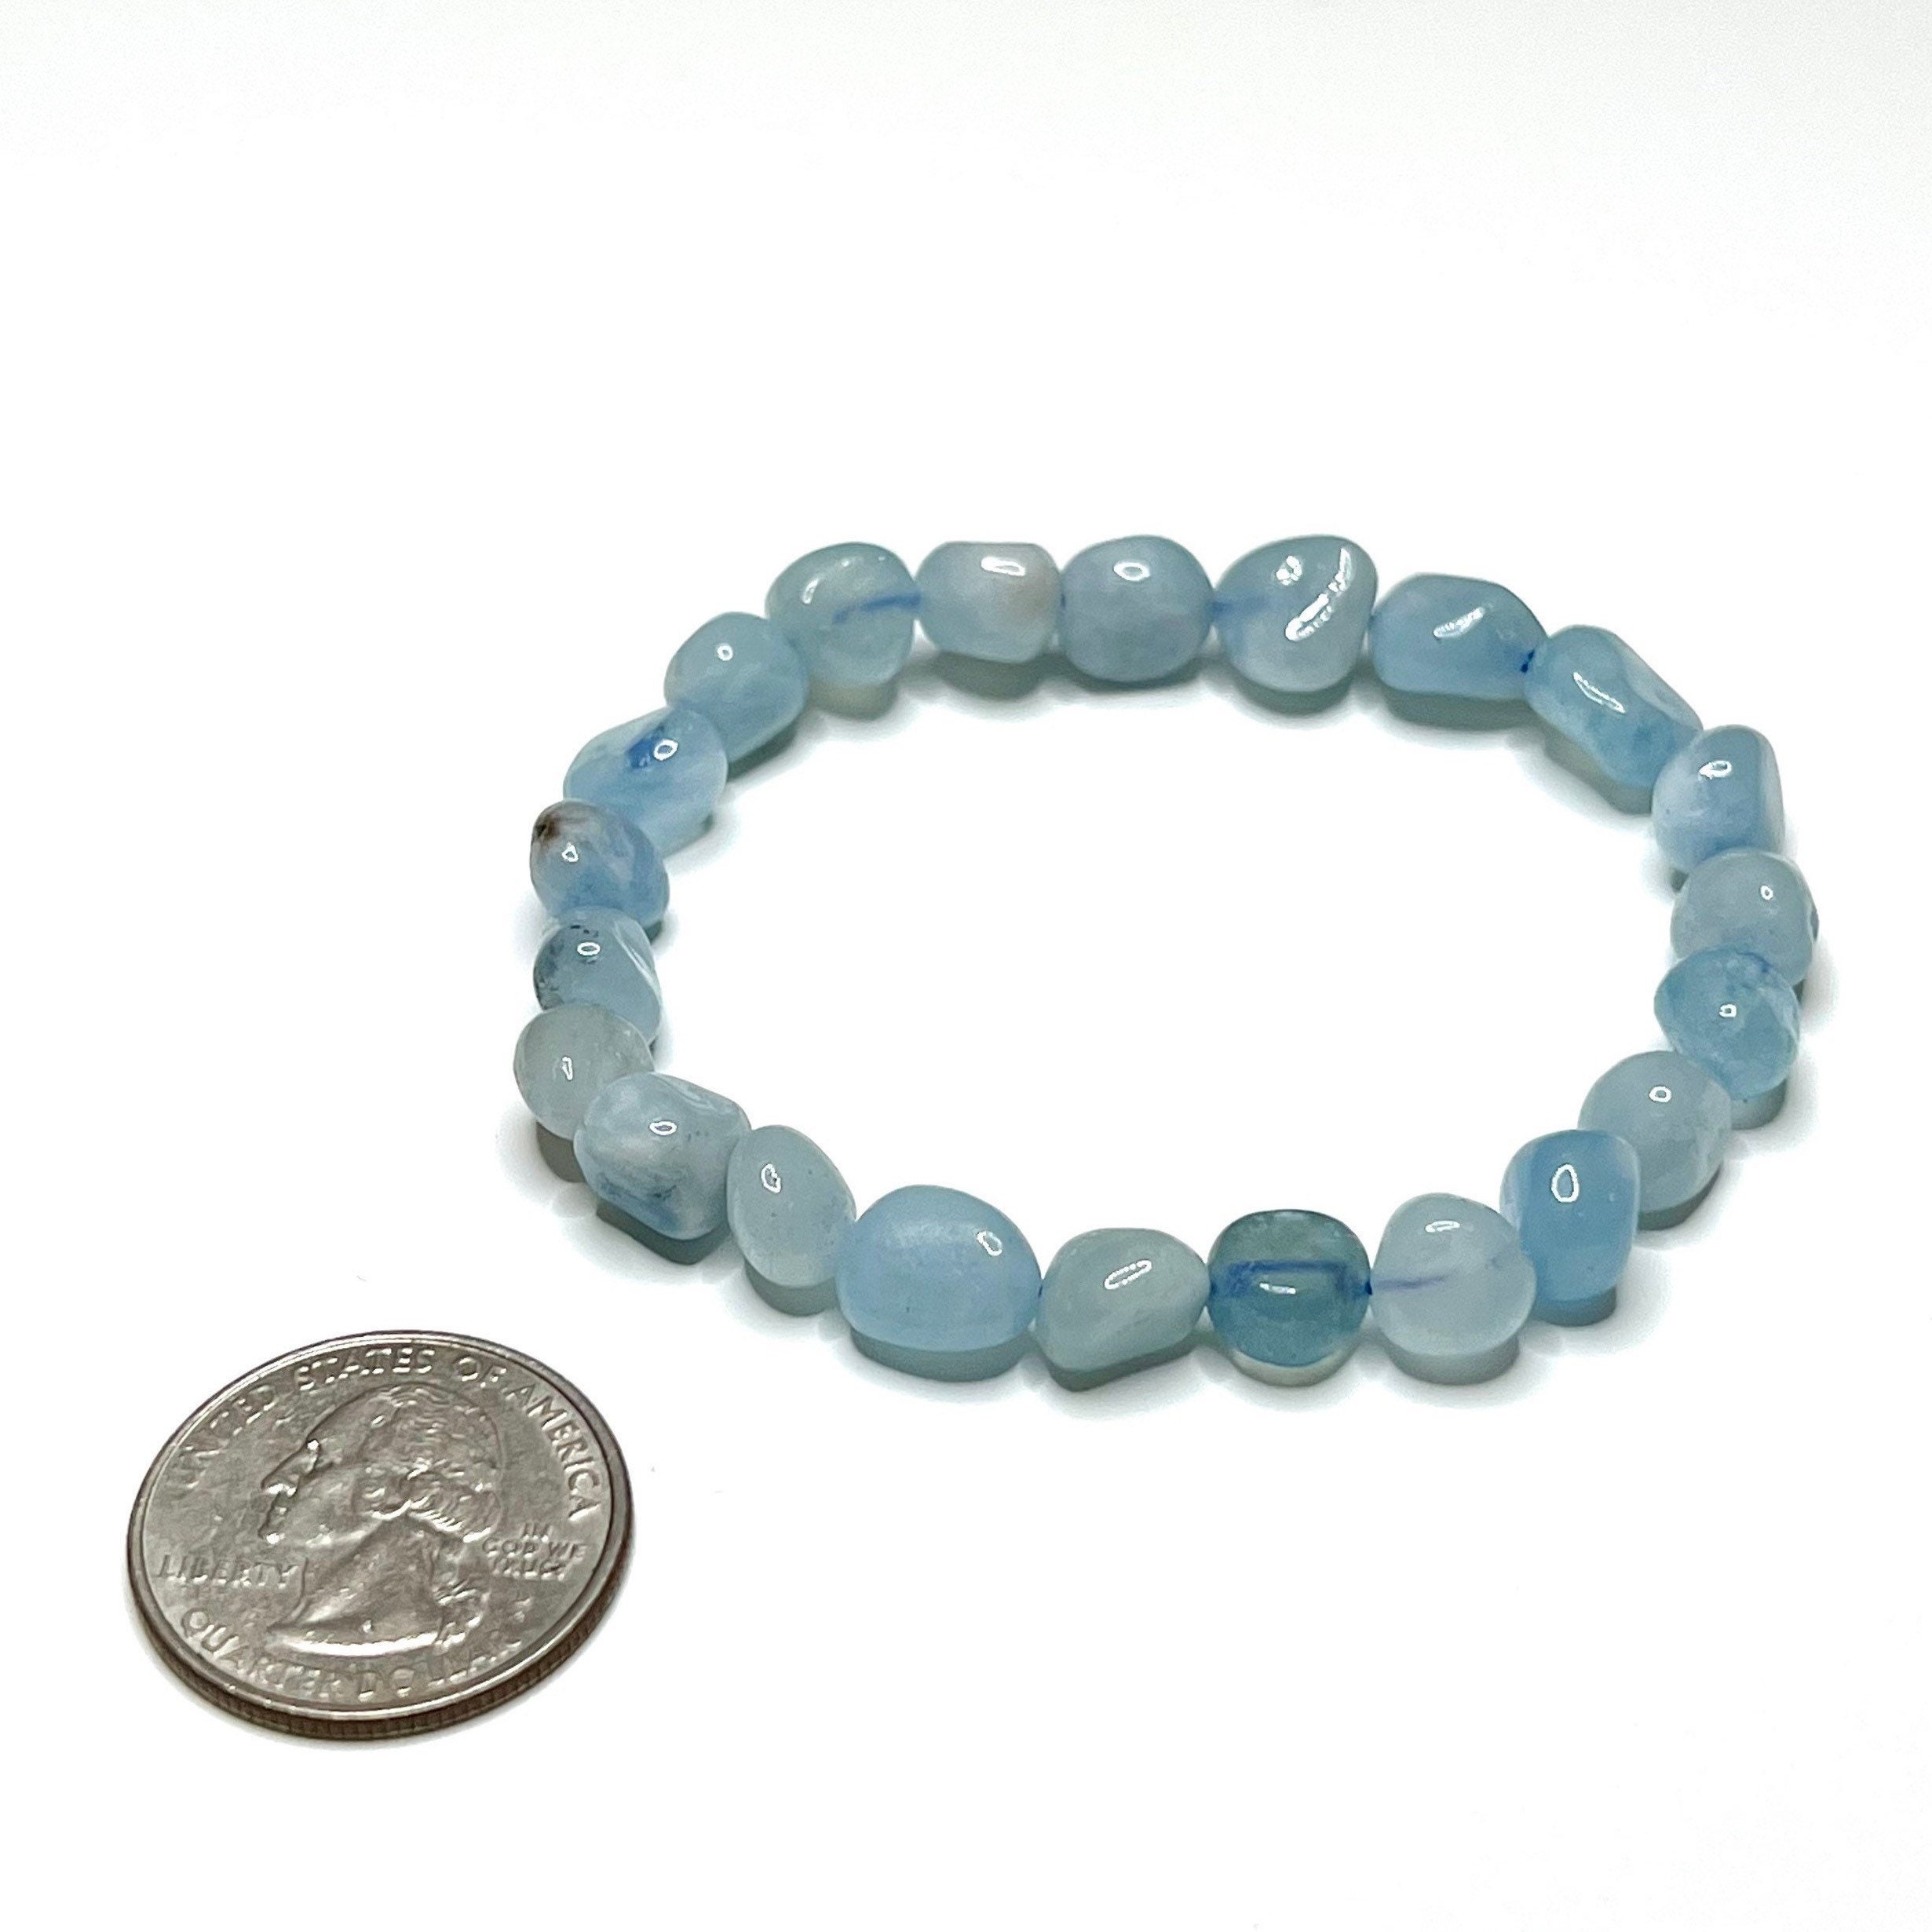 Natural Blue Aquamarine Crystal Carved Clear Round Beads Bracelet 12mm AAAA